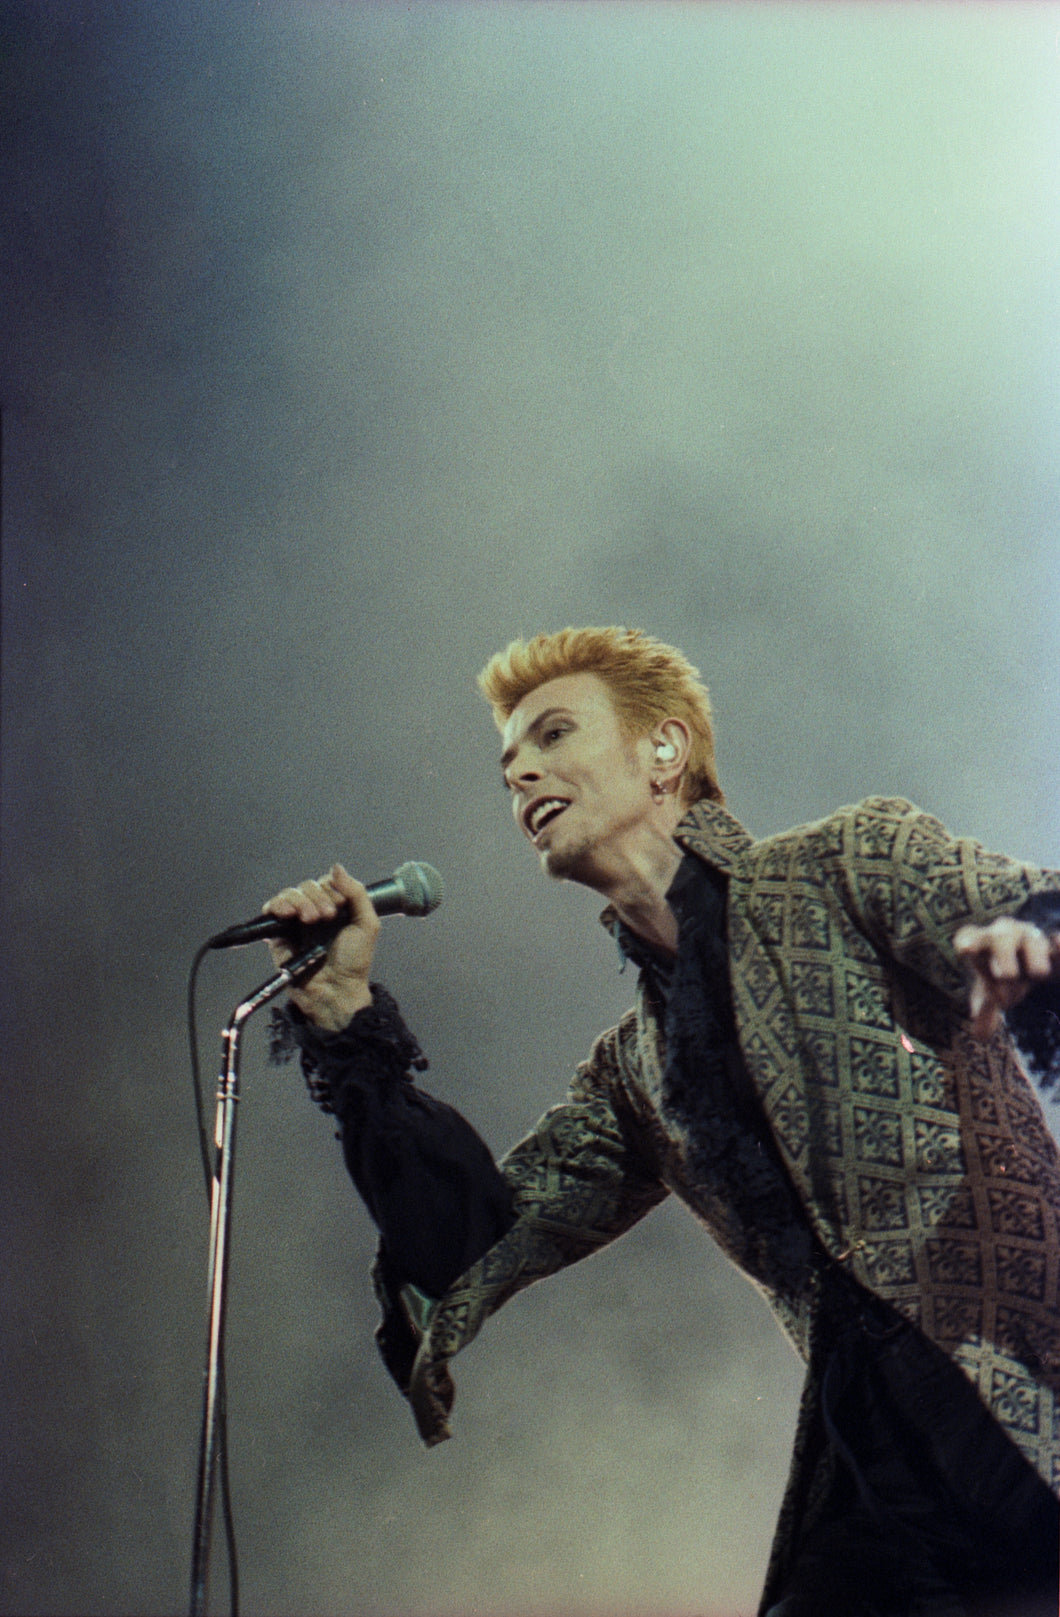 David Bowie (50th Birthday Show at Madison Square Garden, 1997)